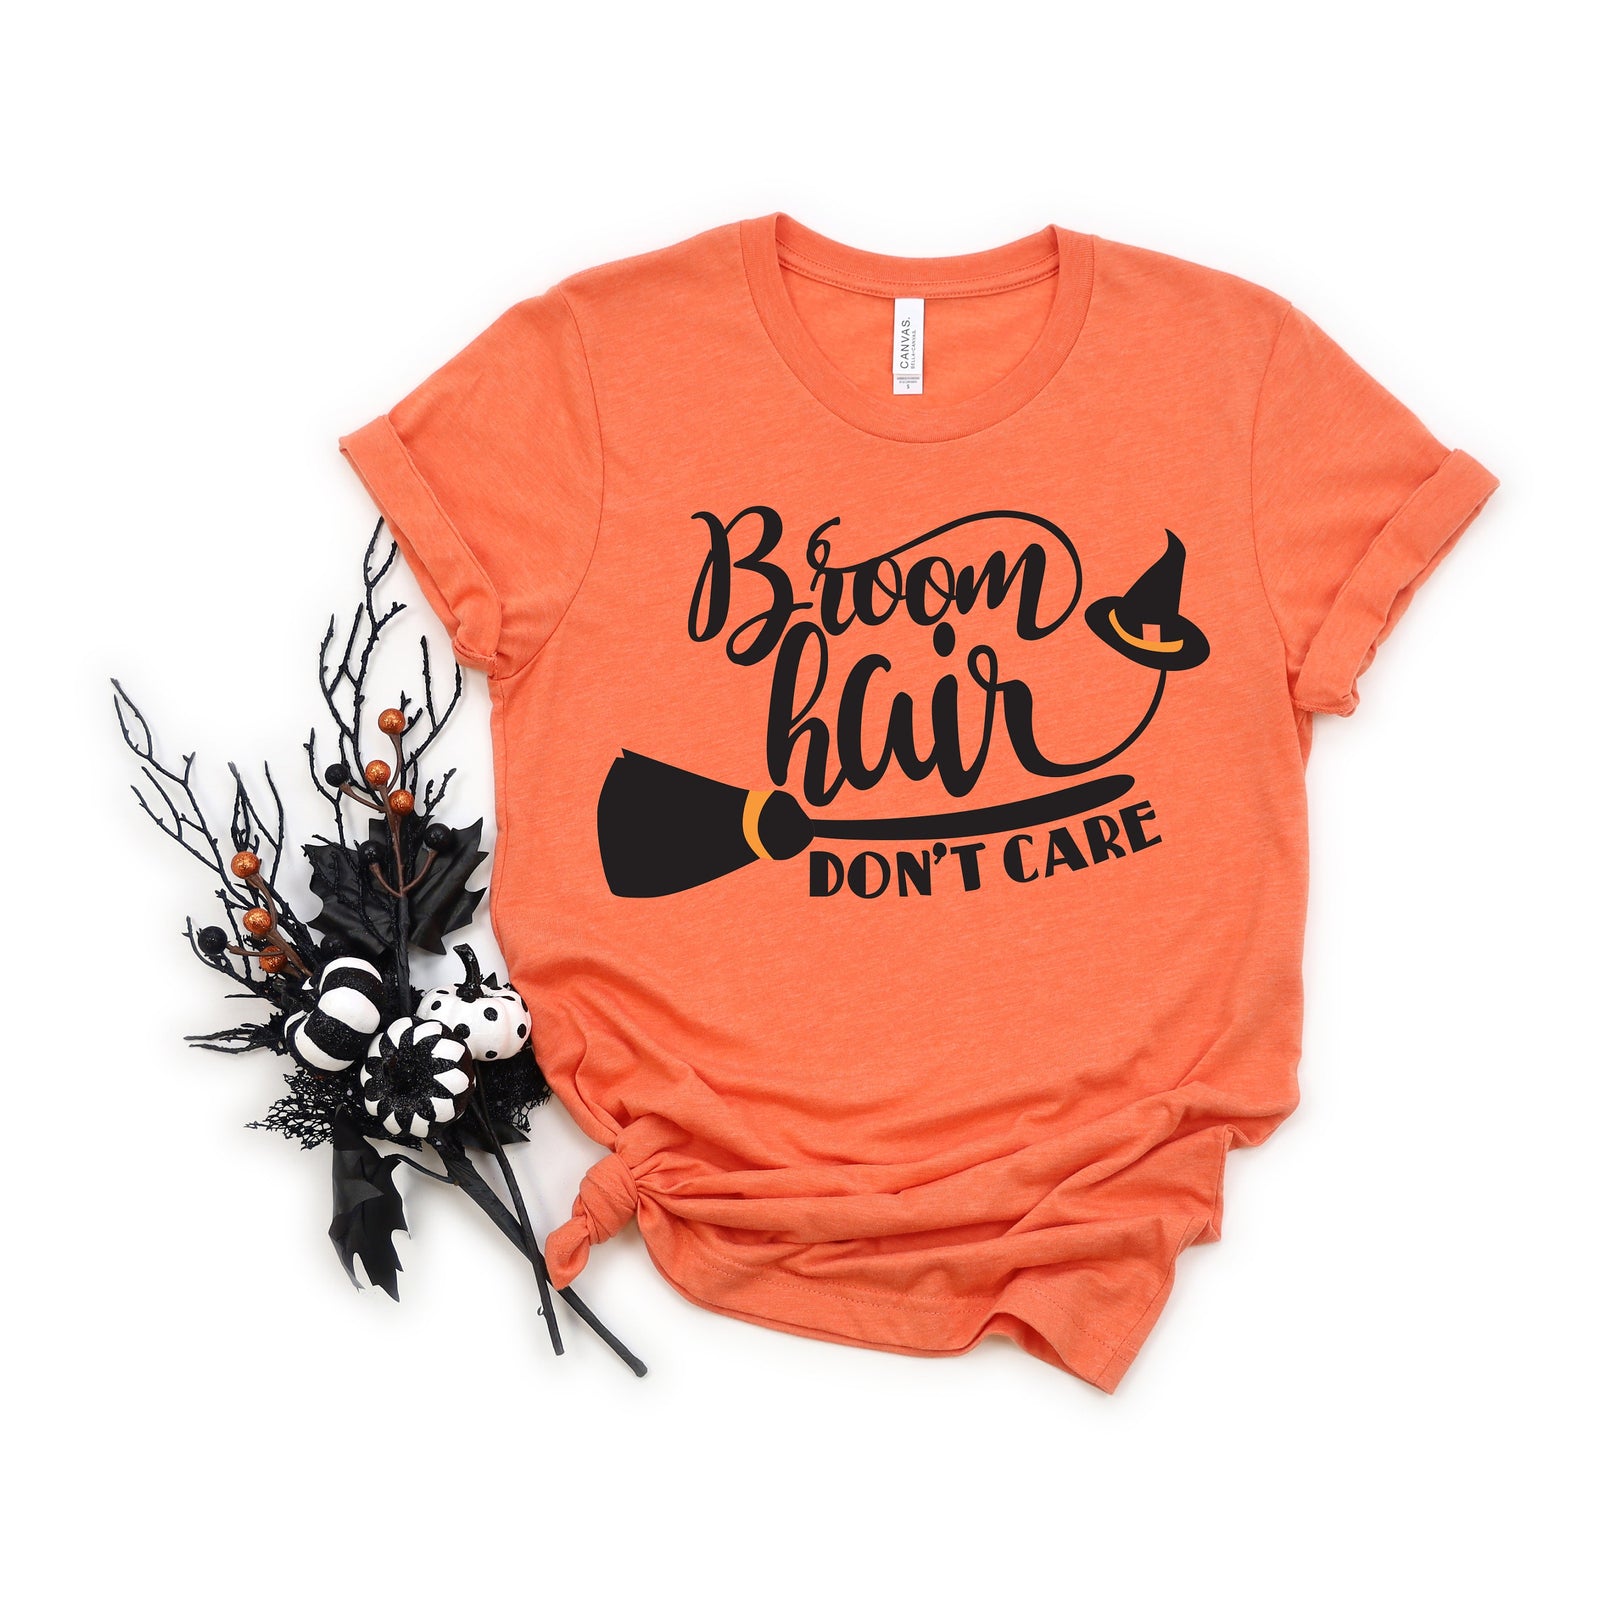 Broom Hair Don't Care Adult T Shirt - Halloween - Funny Not So Scary Shirts